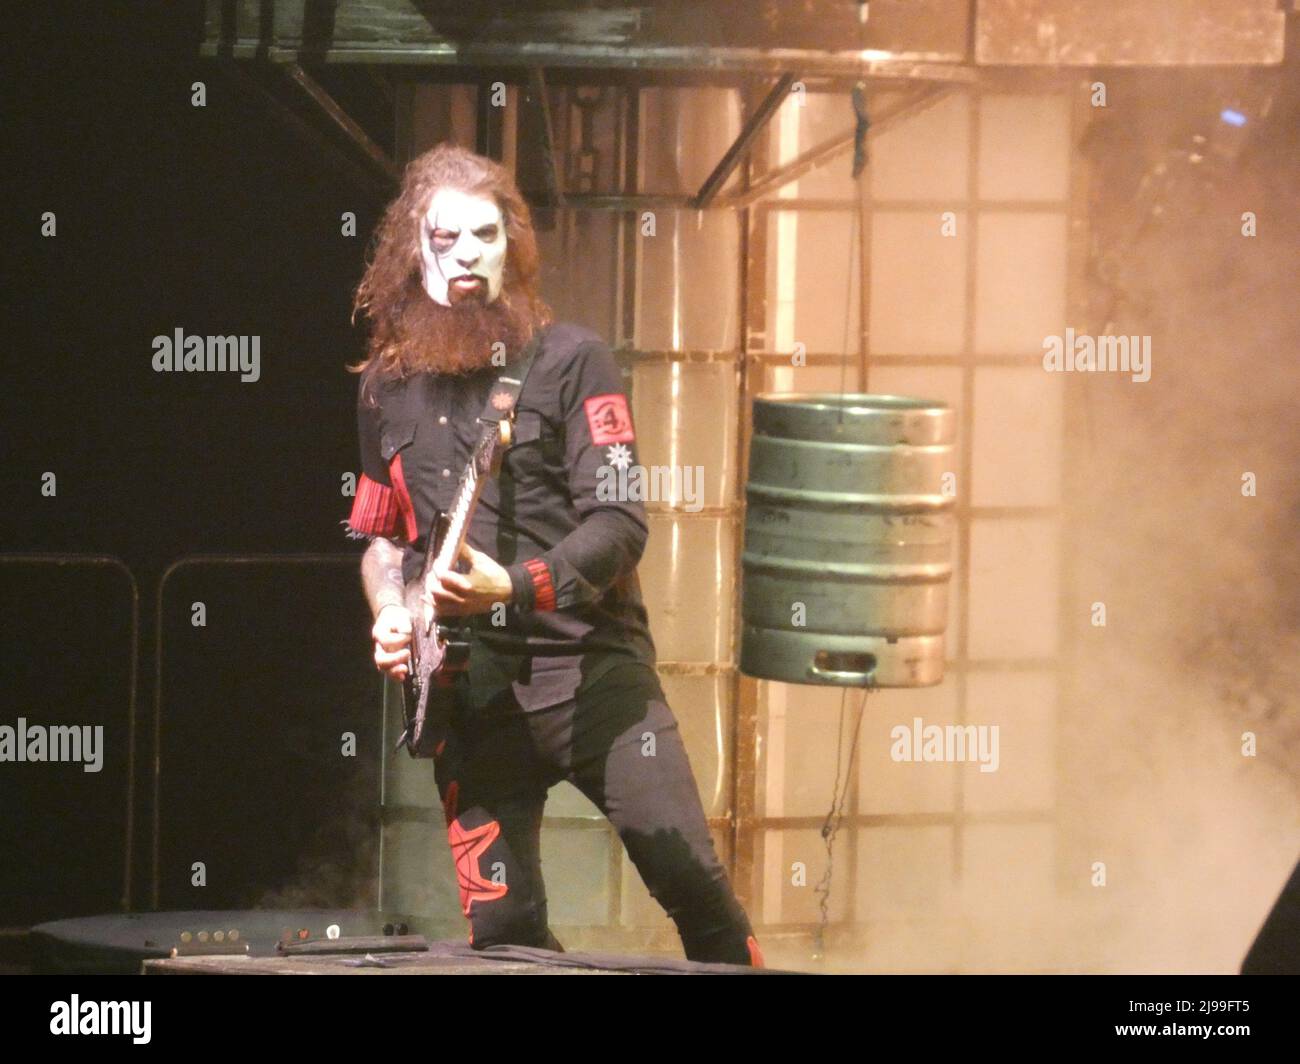 Barclays Center, Brooklyn, NY, USA. May 20, 2022. Heavy Metal Rock Sensation, the Slipknot Band hit Brooklyn's massive Barclays Center with the band's signature trademark of satanic terror and unbridled chaos sending a packed house into an epidemic frensy. Credit: ©Julia Mineeva/EGBN TV News/Alamy Live News Stock Photo